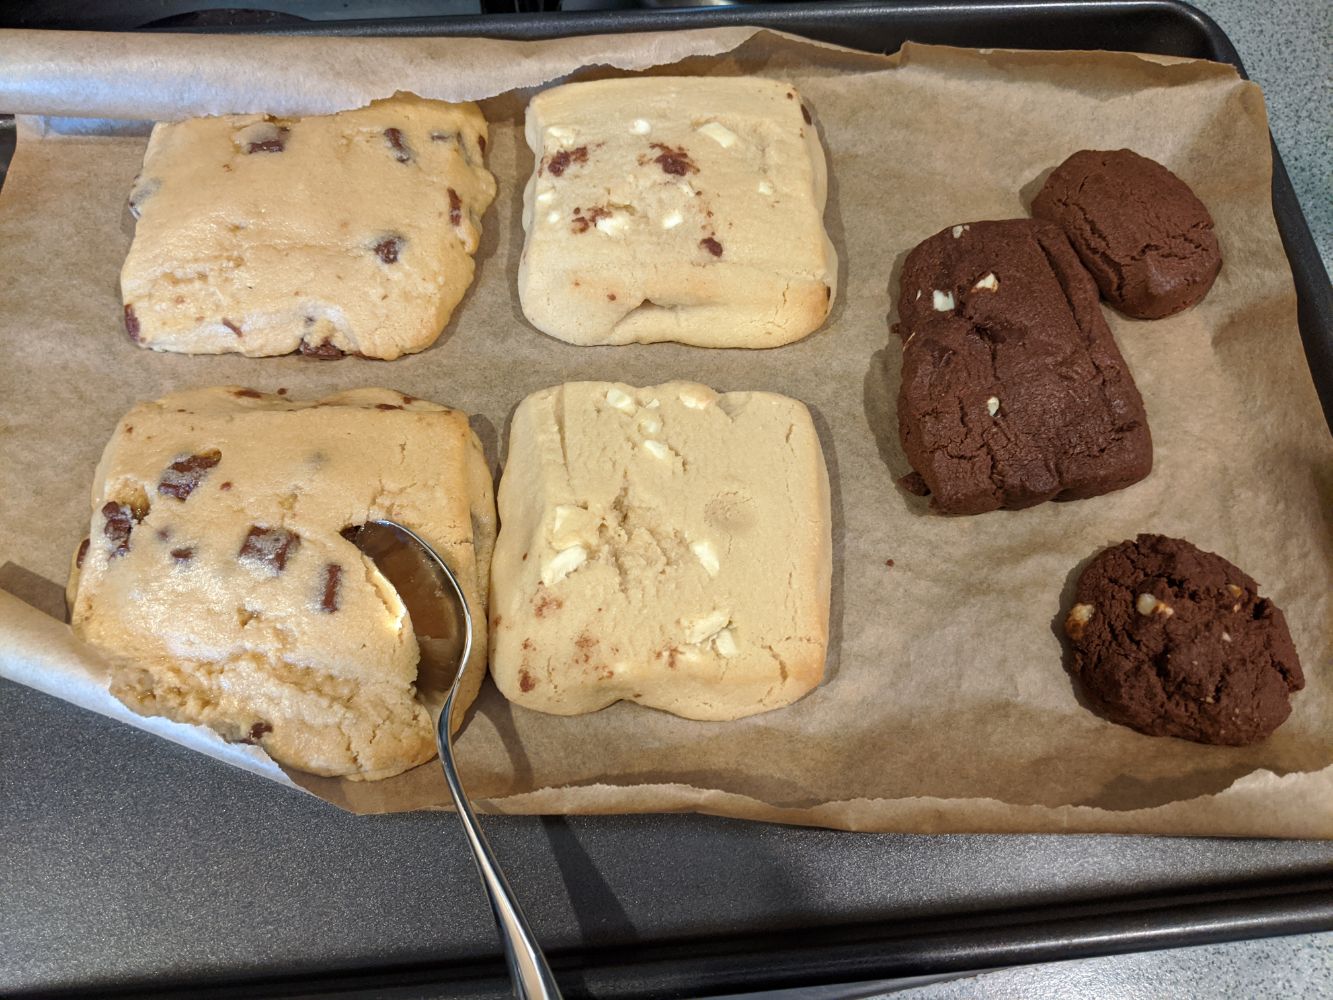 A photo of some somewhat-cooked cookies, with a spoon sinking into one to show how gooey they still are